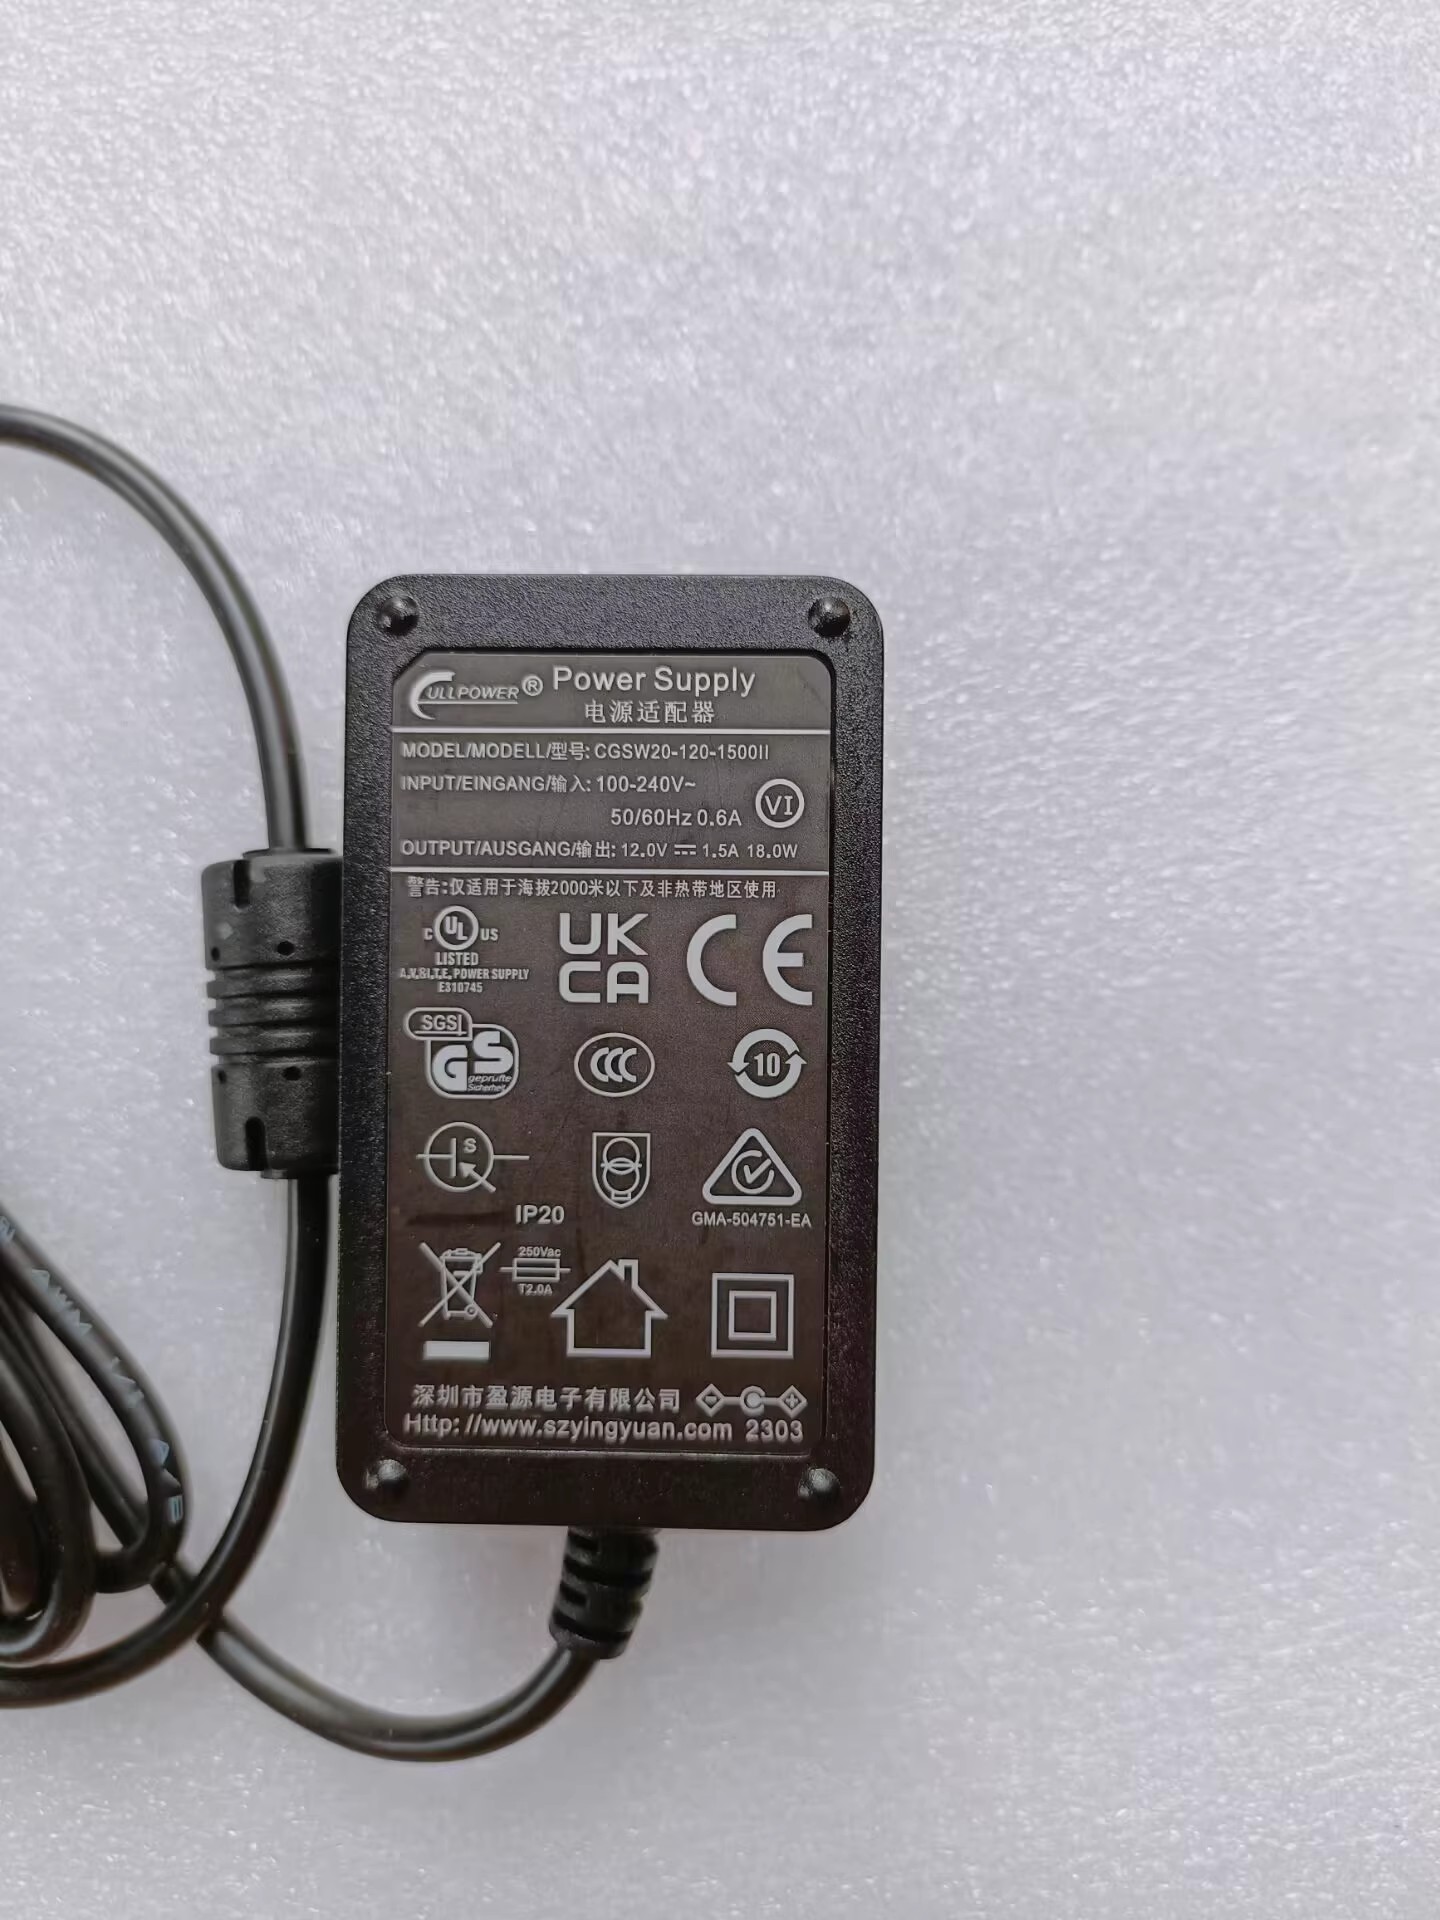 *Brand NEW* 12V 1.5A AC DC ADAPTHE CGSW20-120-1500II POWER Supply - Click Image to Close